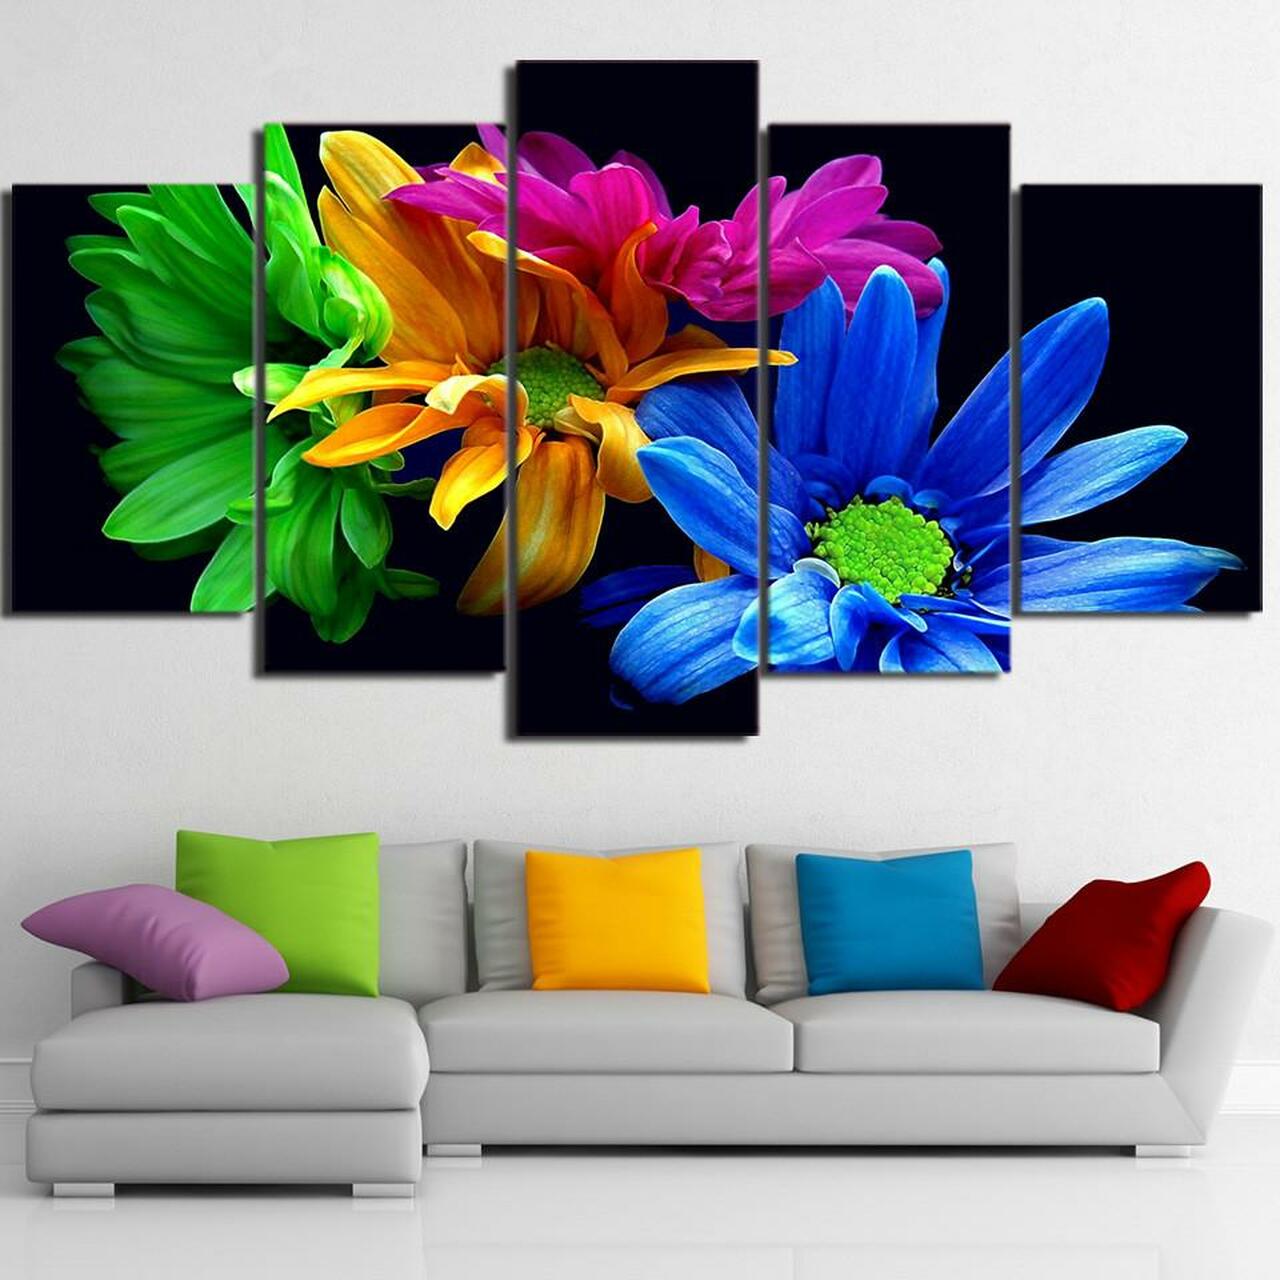 Colorful Daisies 5 Piece Canvas Art Wall Decor